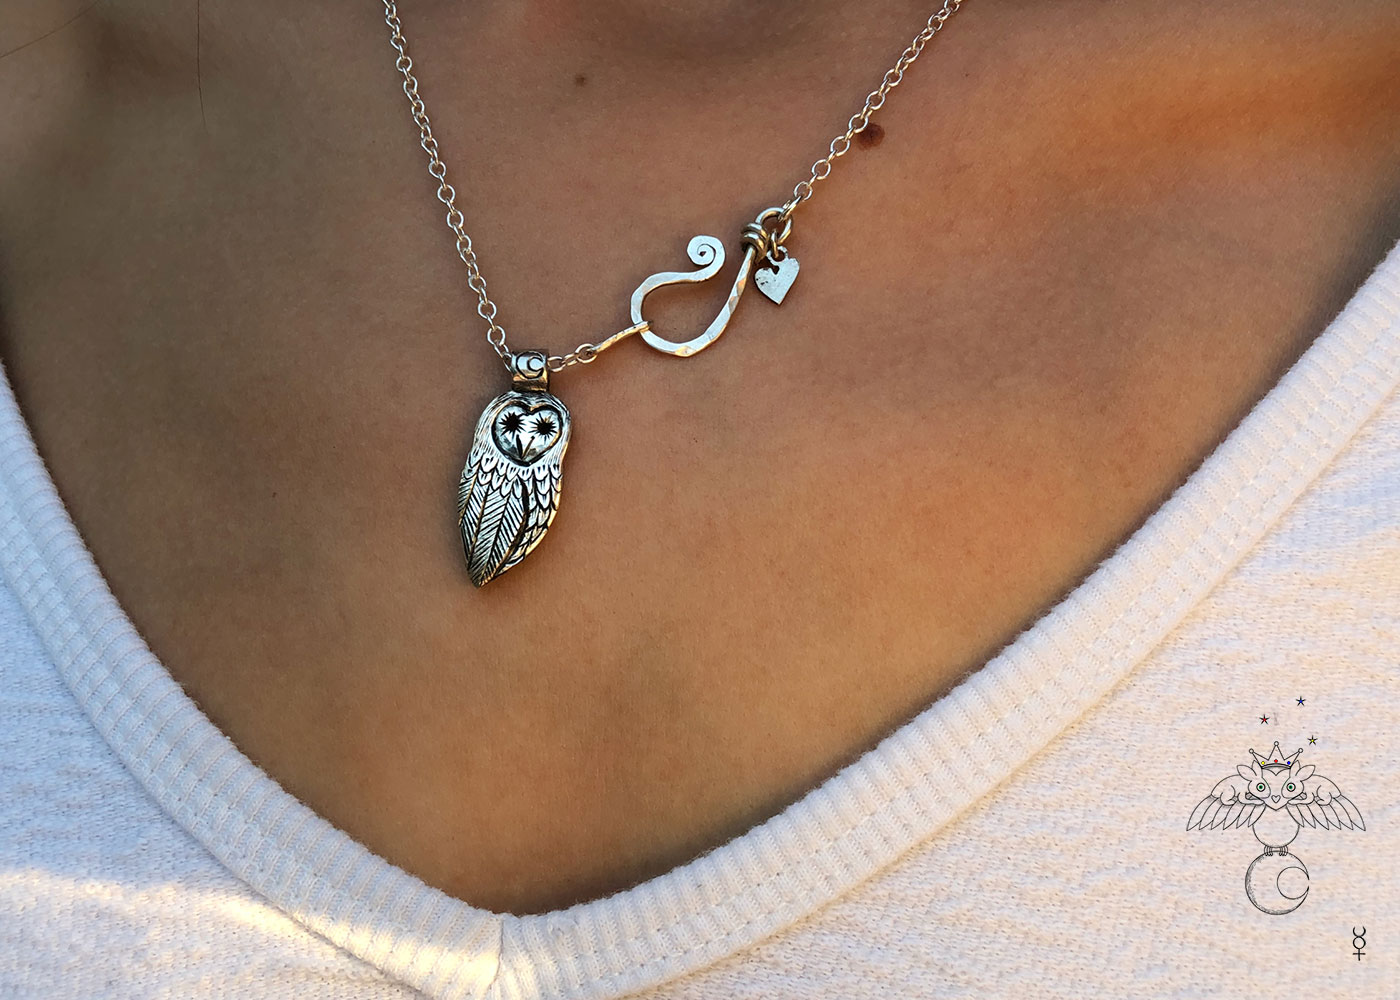 Owl necklace handmade and recycled coin jewellery. Independent artisan jeweller studio workshop specialising in nature themes. Each piece is ethically made and original.